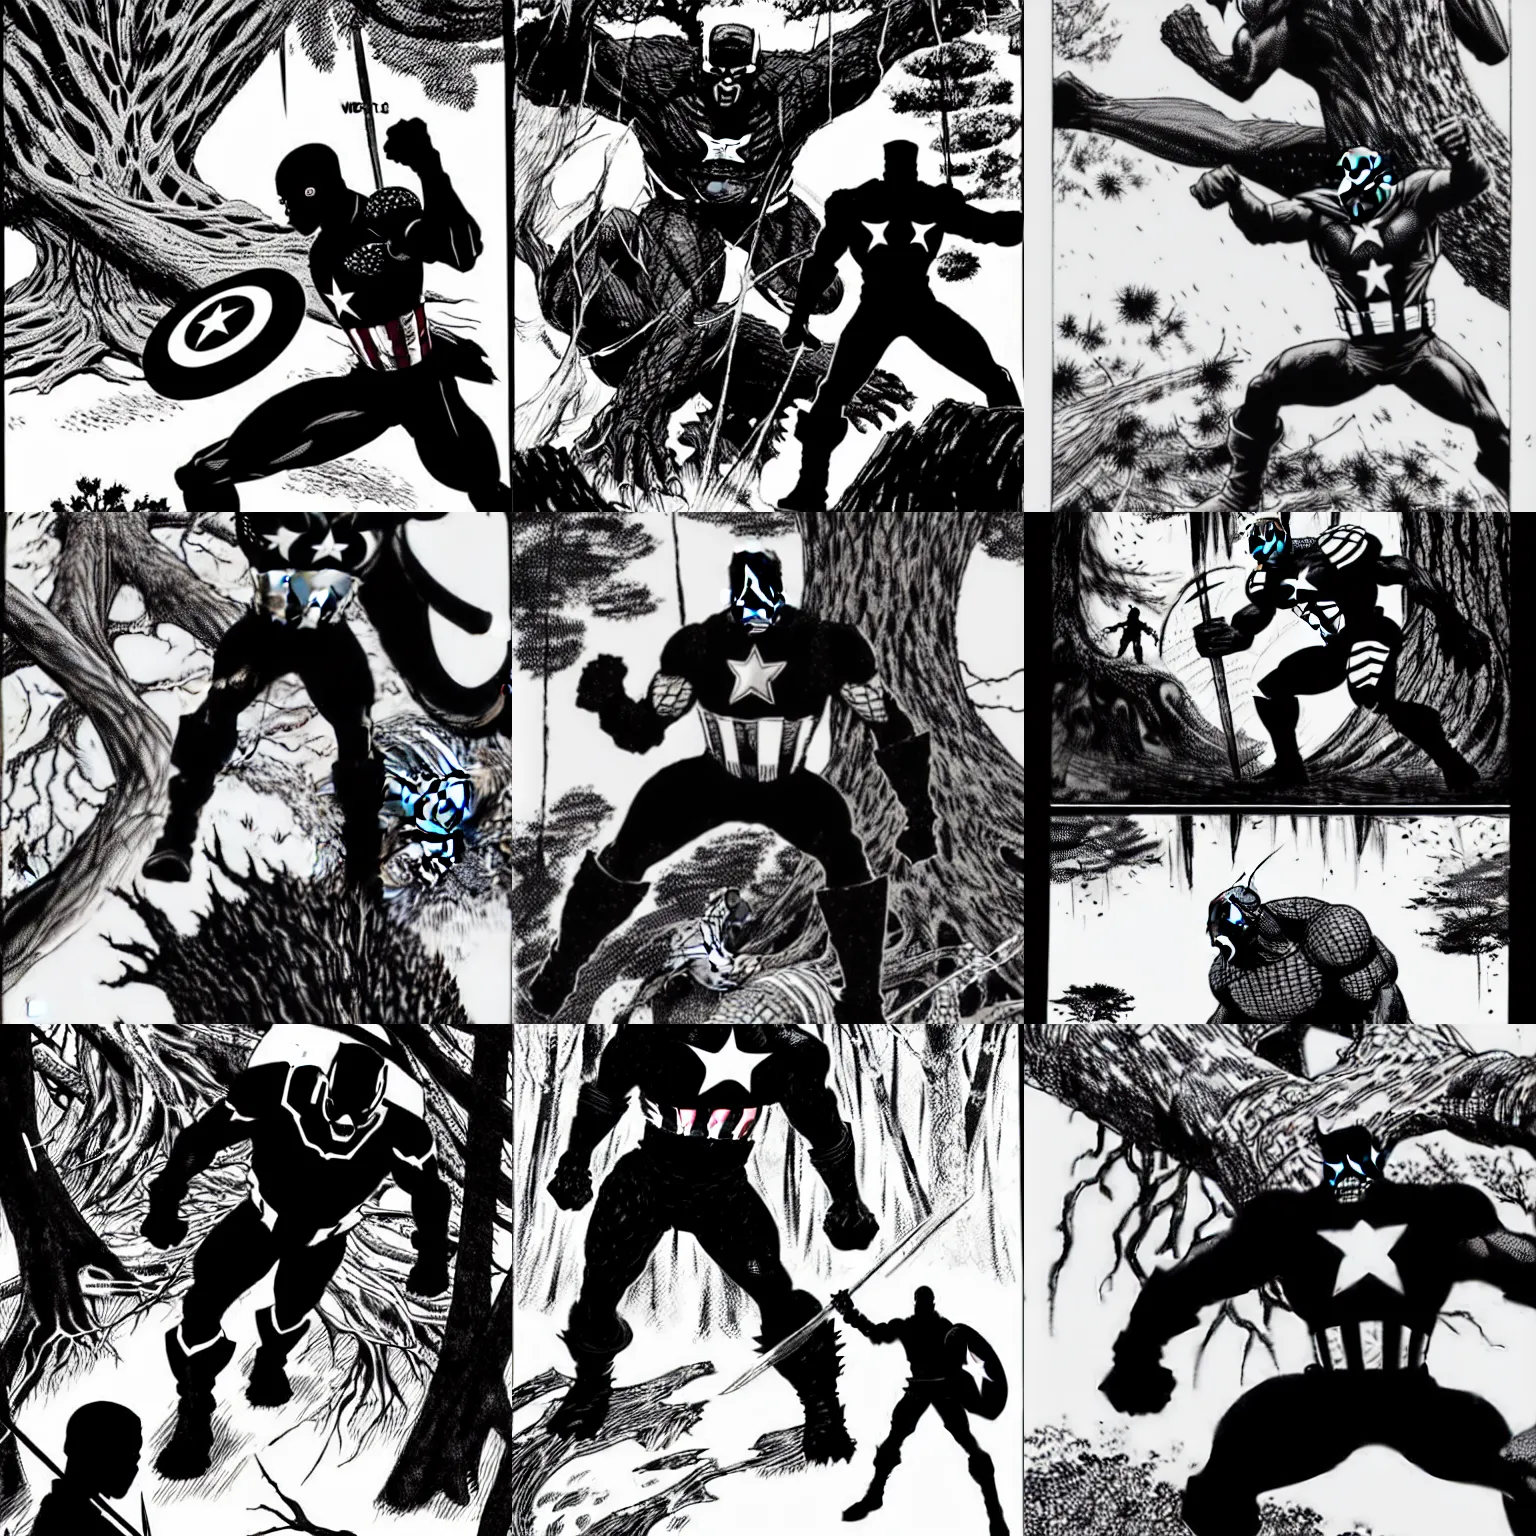 Prompt: black and whote captain america defends himself with a shield against the sword of a giant tree monster in the forest, by tsutomu nihei, black and white